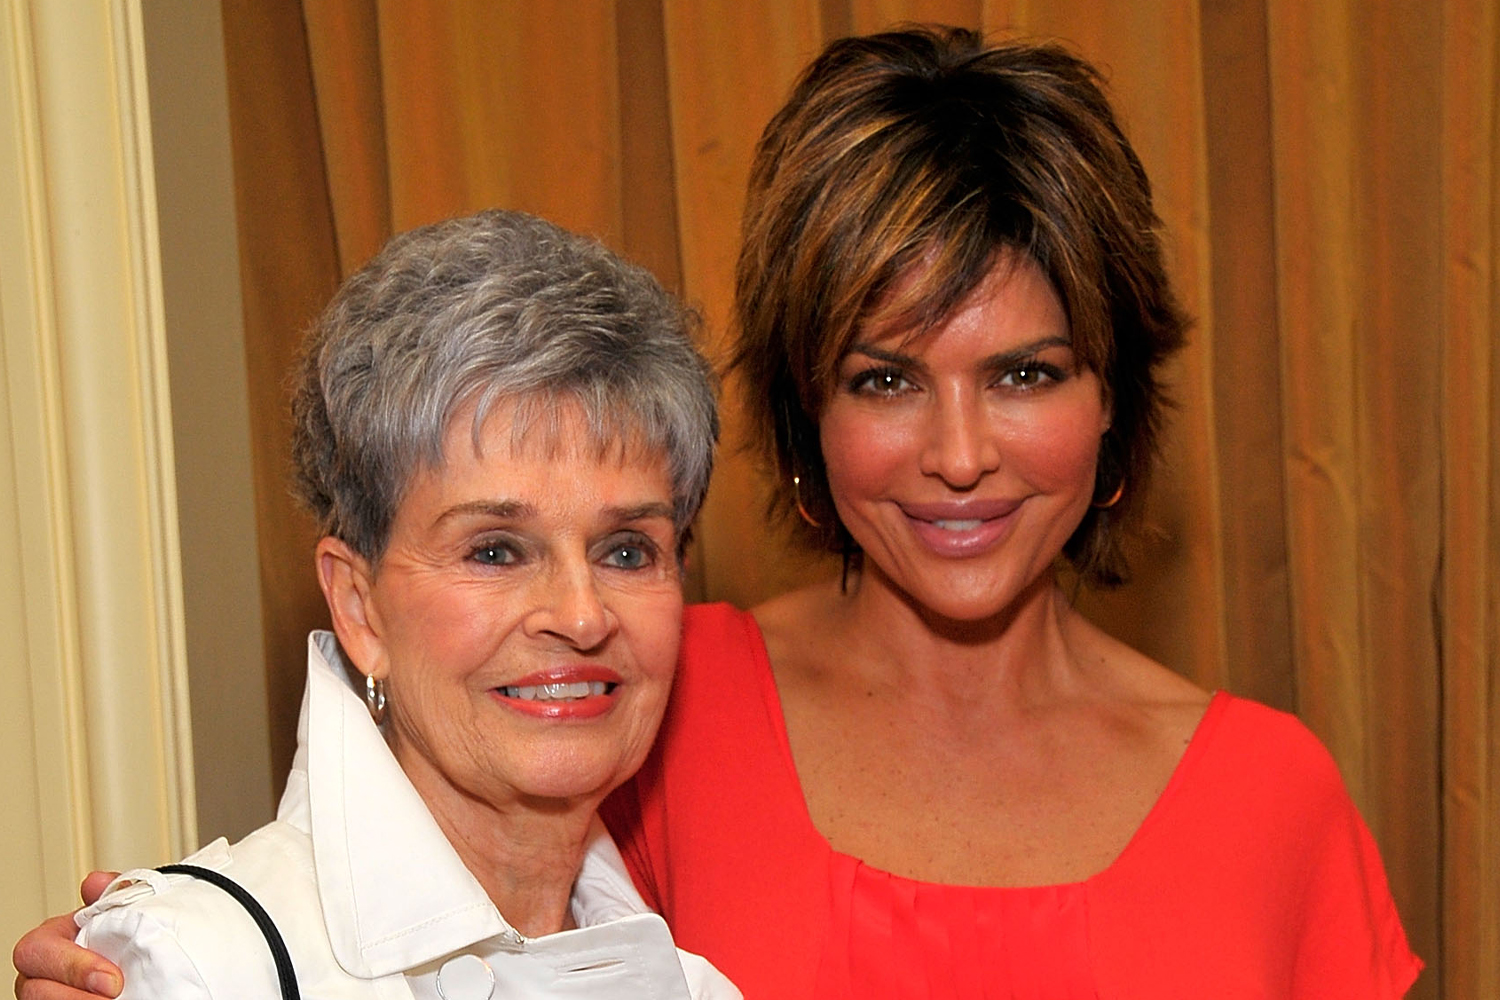 Rhobh Star Lisa Rinna Shares Heartbreaking News About Her Mother Lois